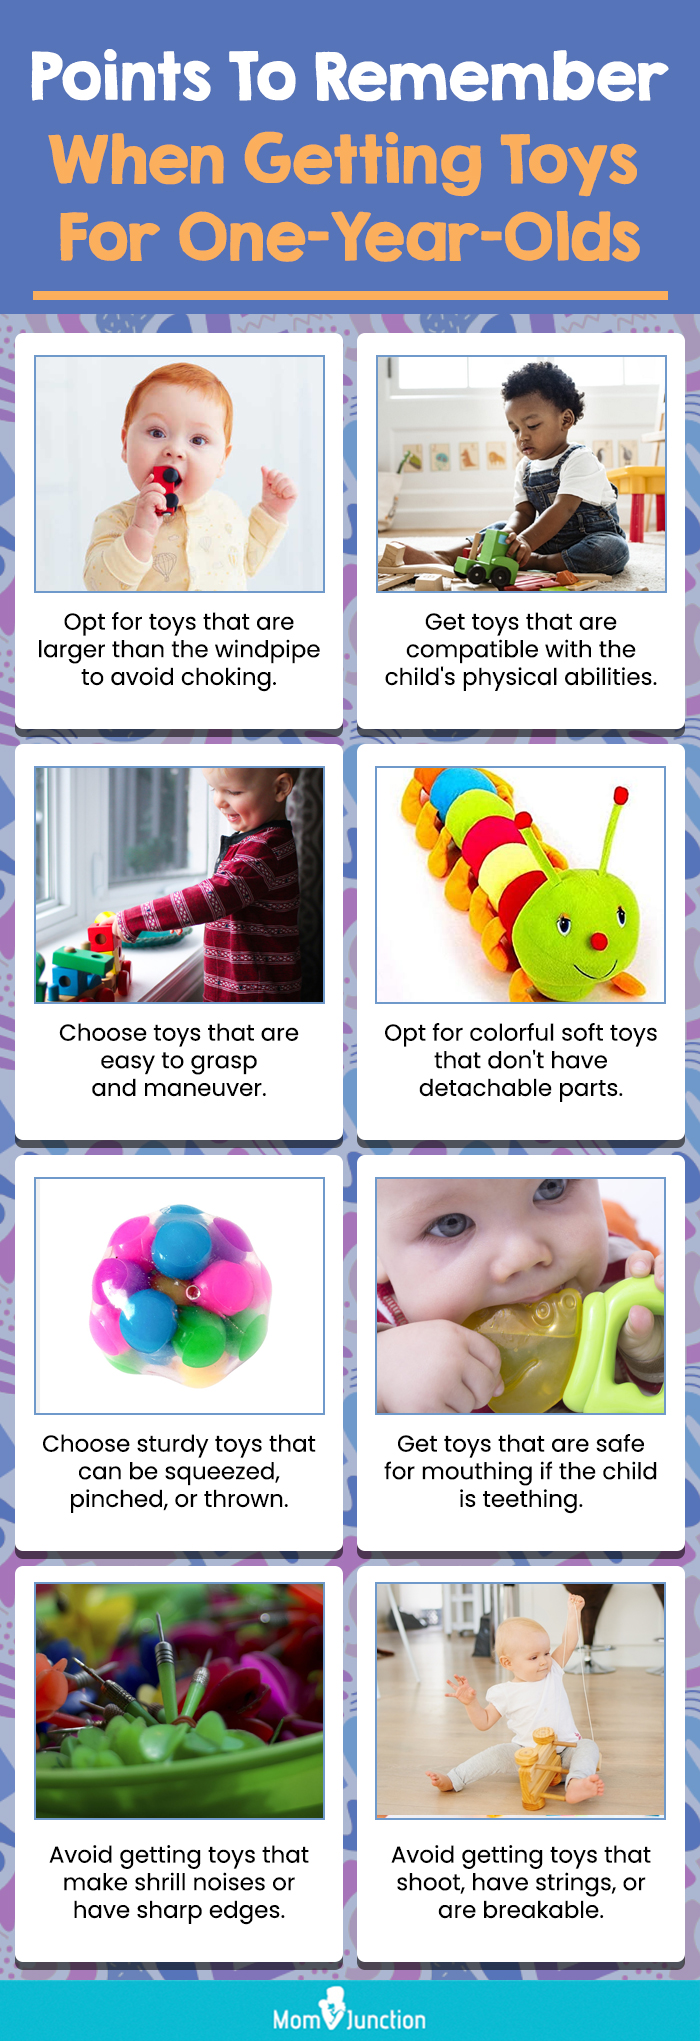 Points To Remember When Getting Toys For One Year Olds (infographic)